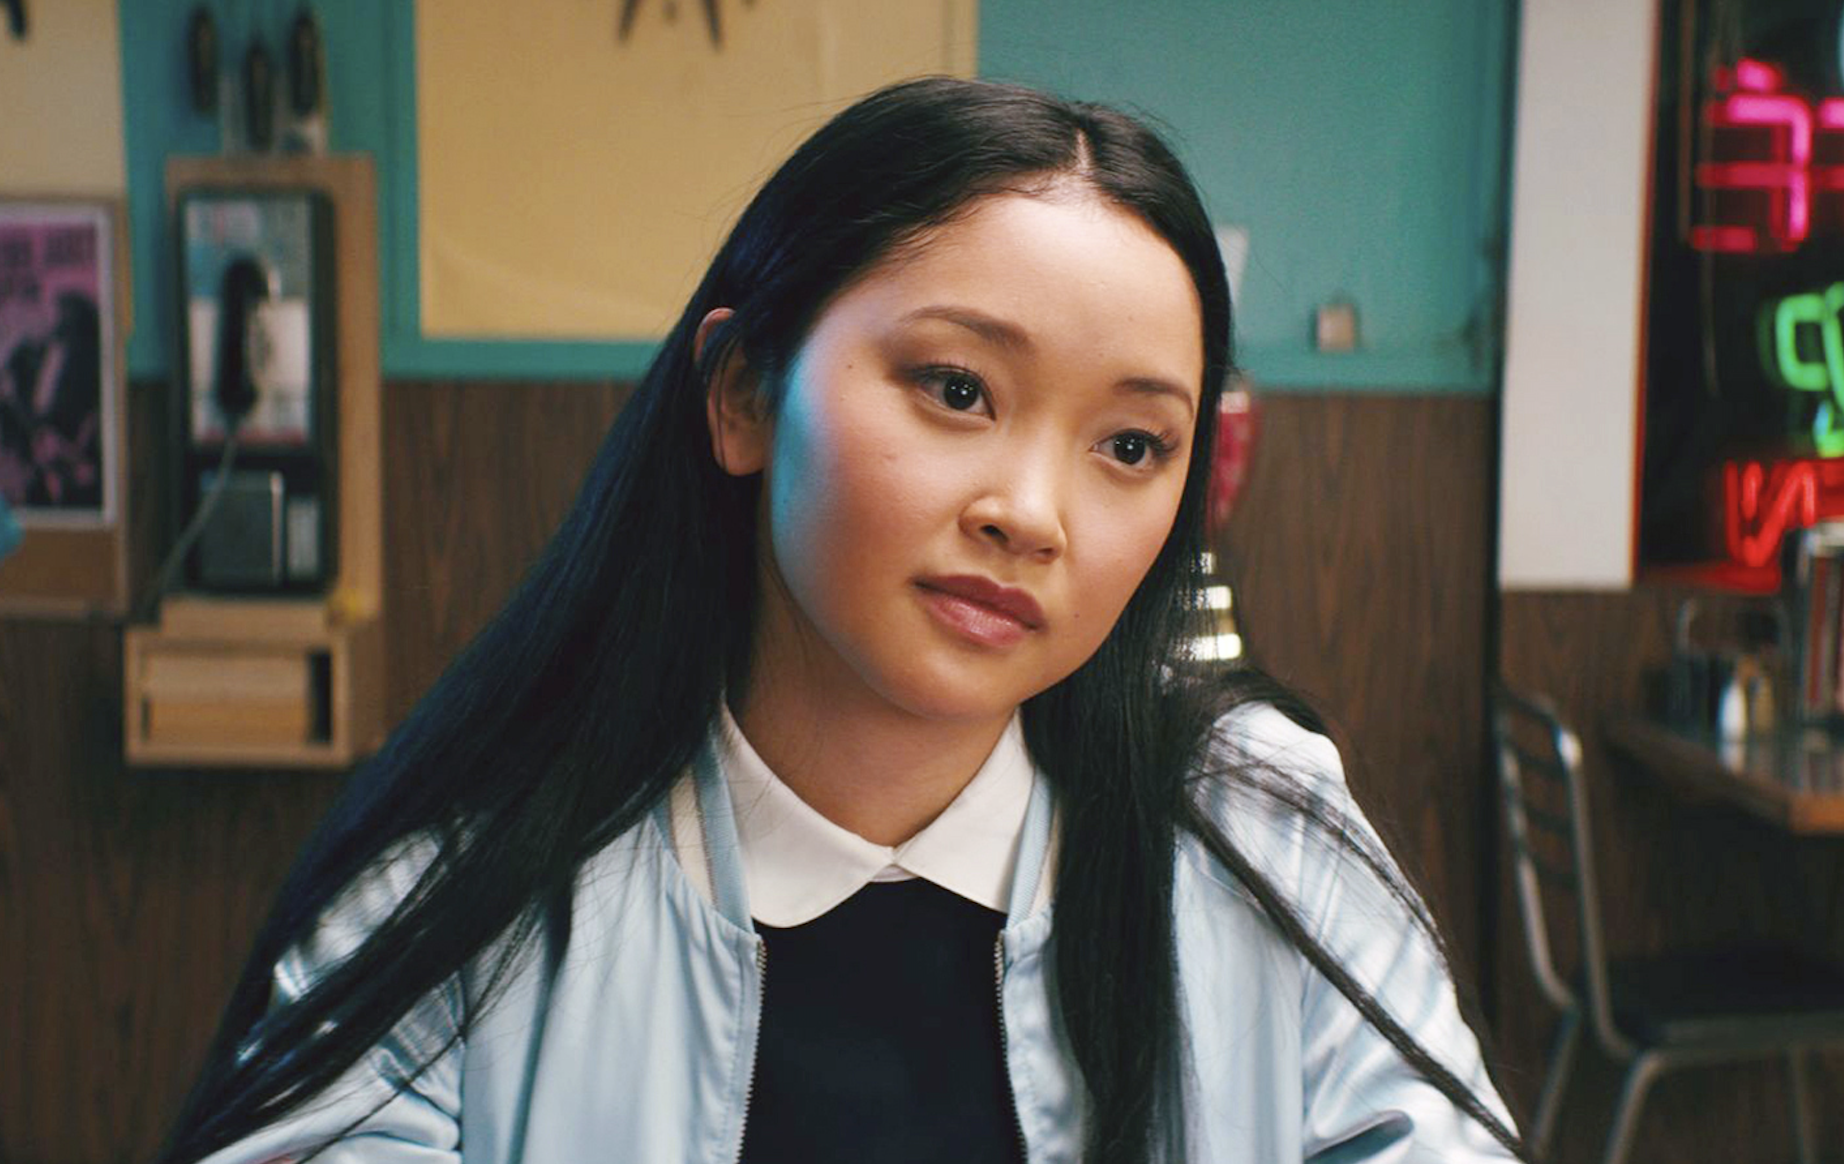 Lara Jean wearing a collared shirt with a pastel sweater